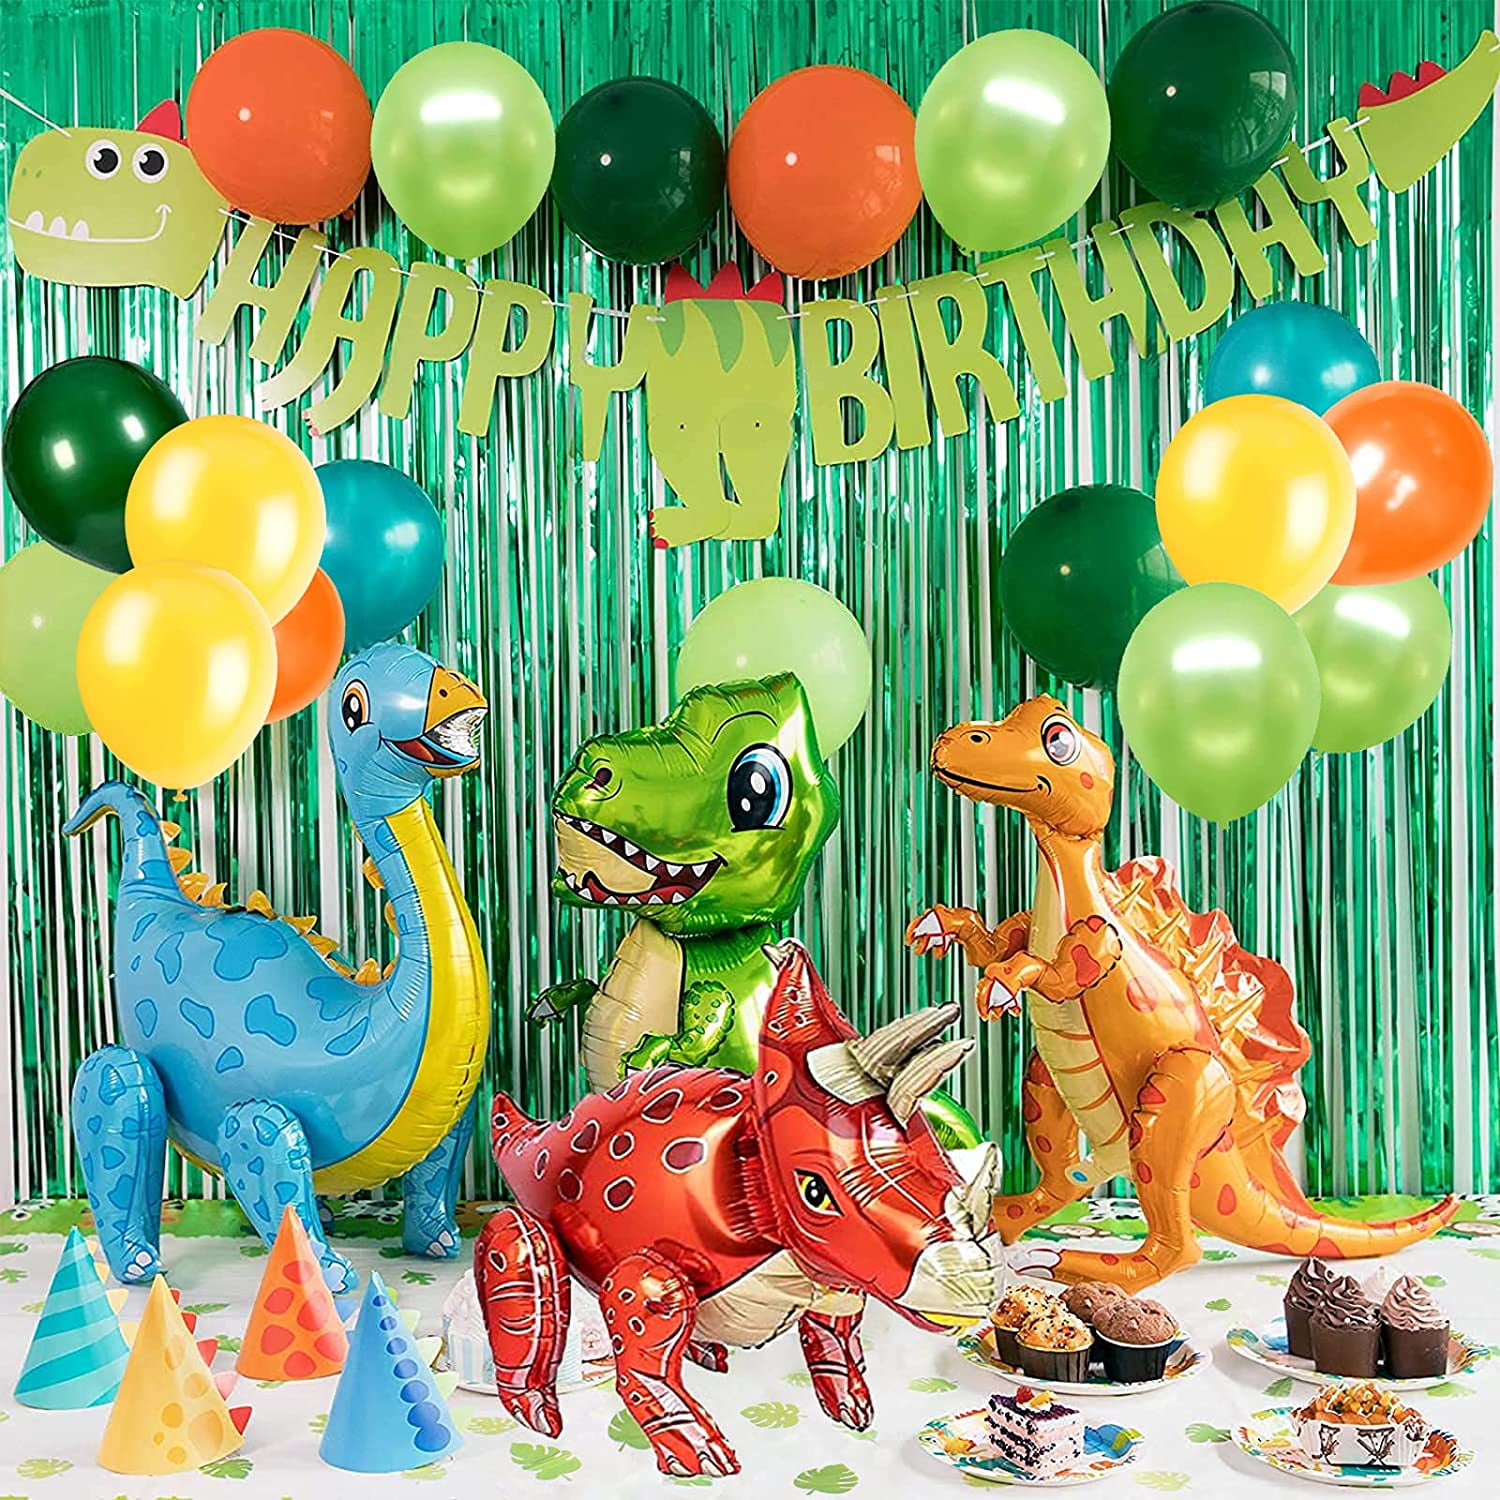 Friendly Dinosaur Party Themed Bundle Includes Plates Napkins & Cups for 8 Guests TLP Party Partysaurus Dinosaur Party Supply Pack